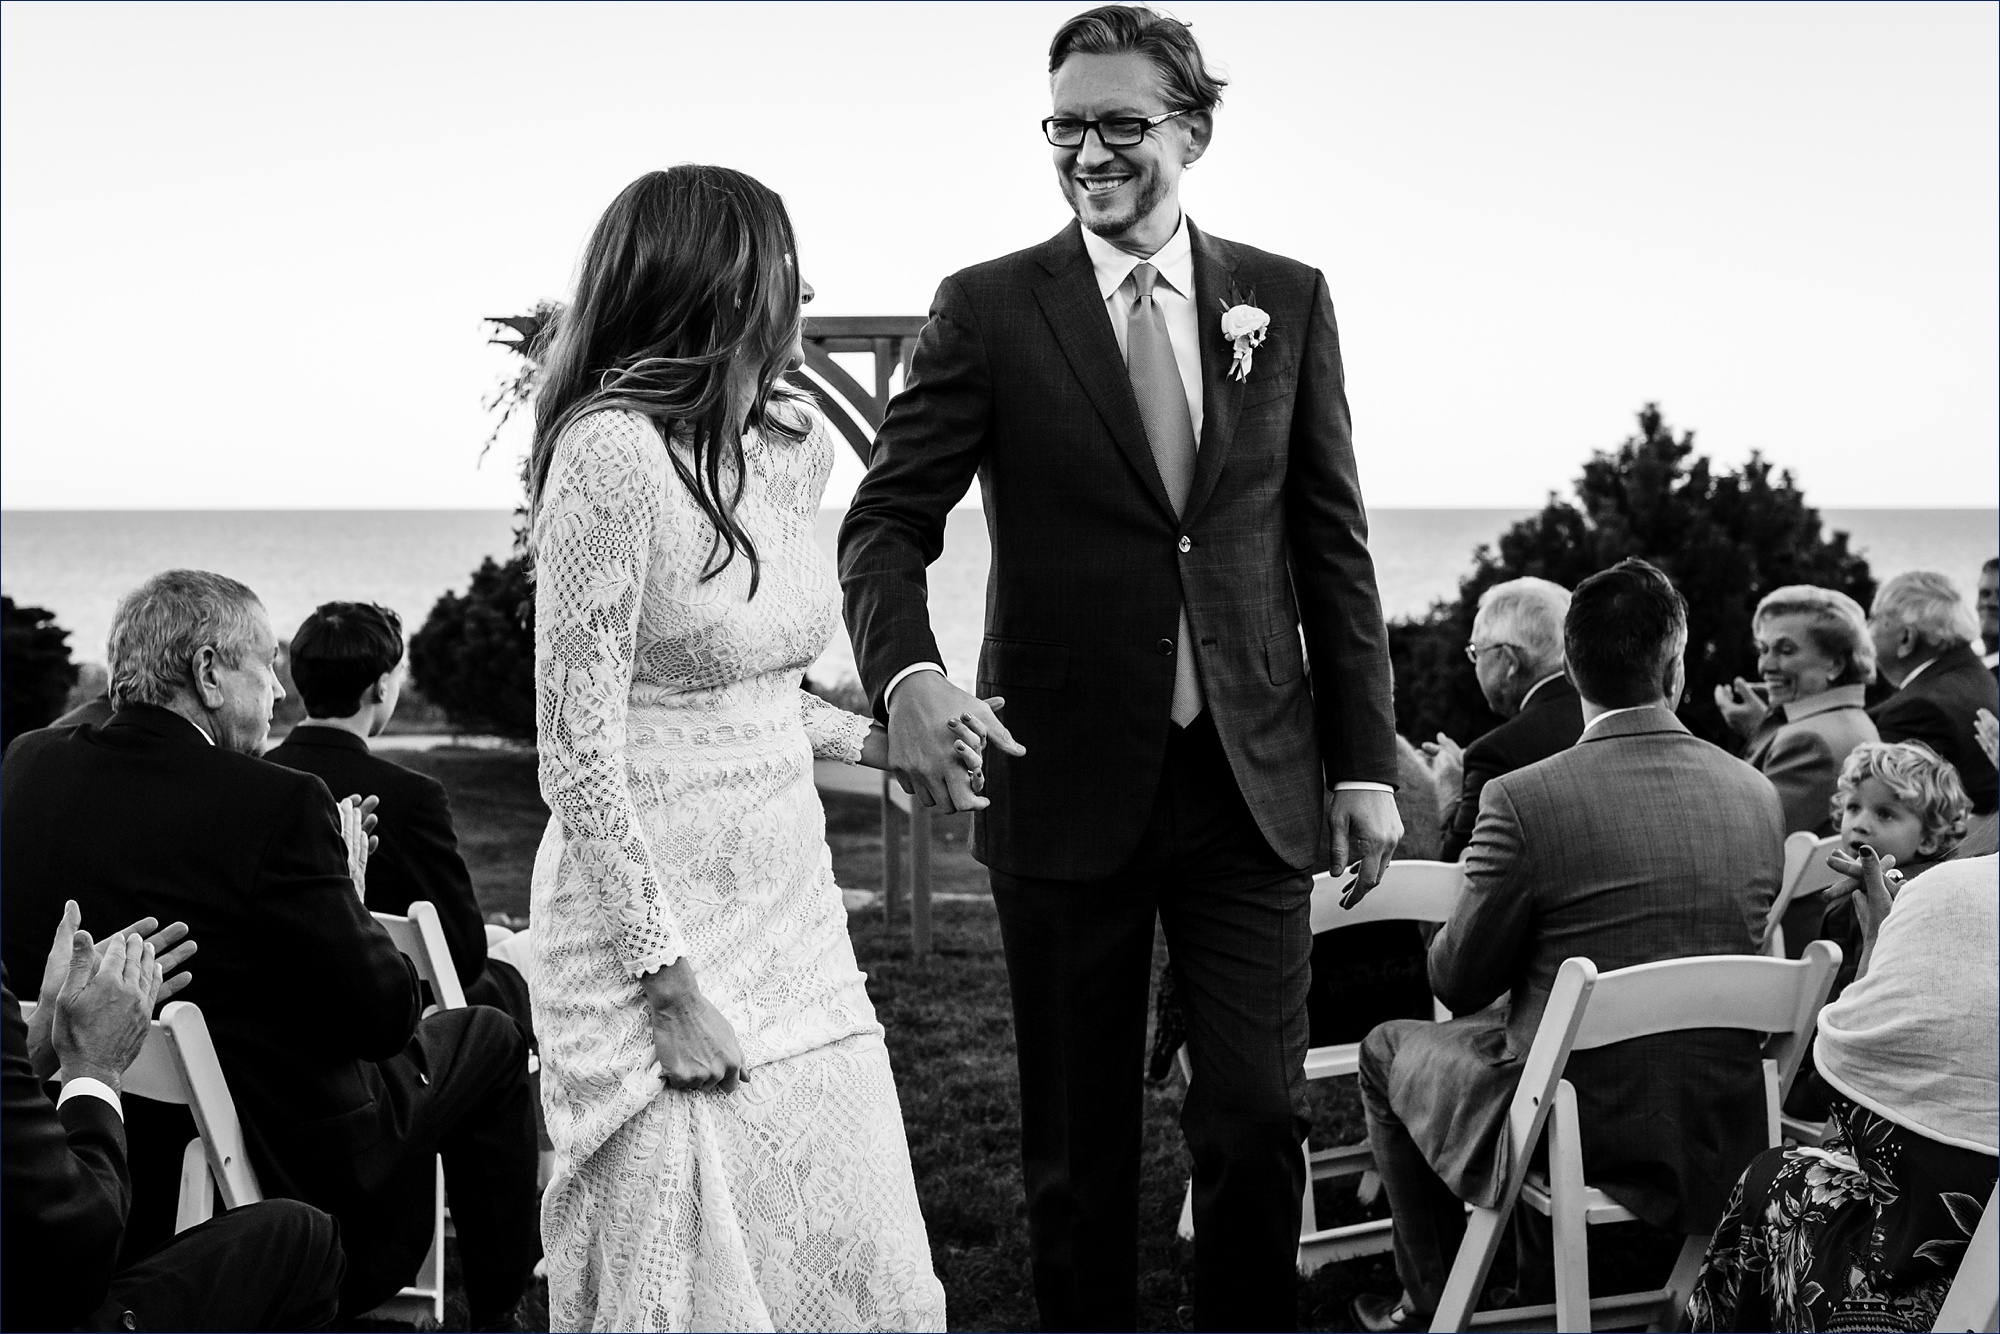 The newlyweds return back up the aisle after the intimate wedding celebration in Maine